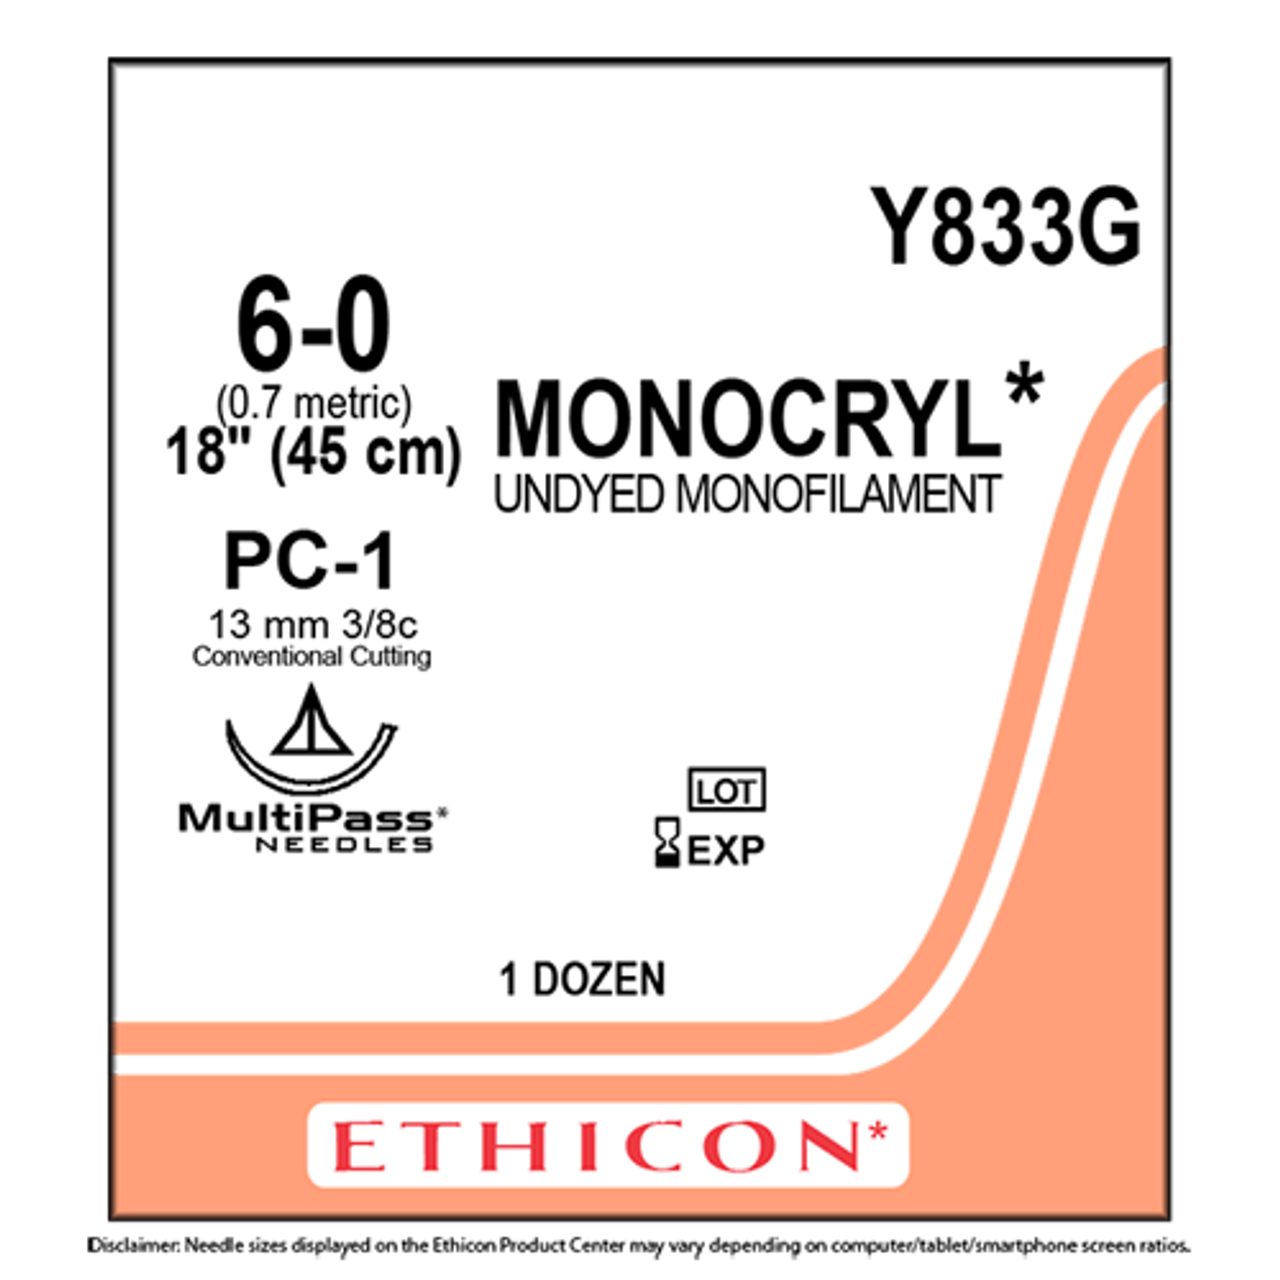 Ethicon Monocryl 6/0, 18 Monocryl Undyed Monofilament Absorbable Suture -  Dental Brands